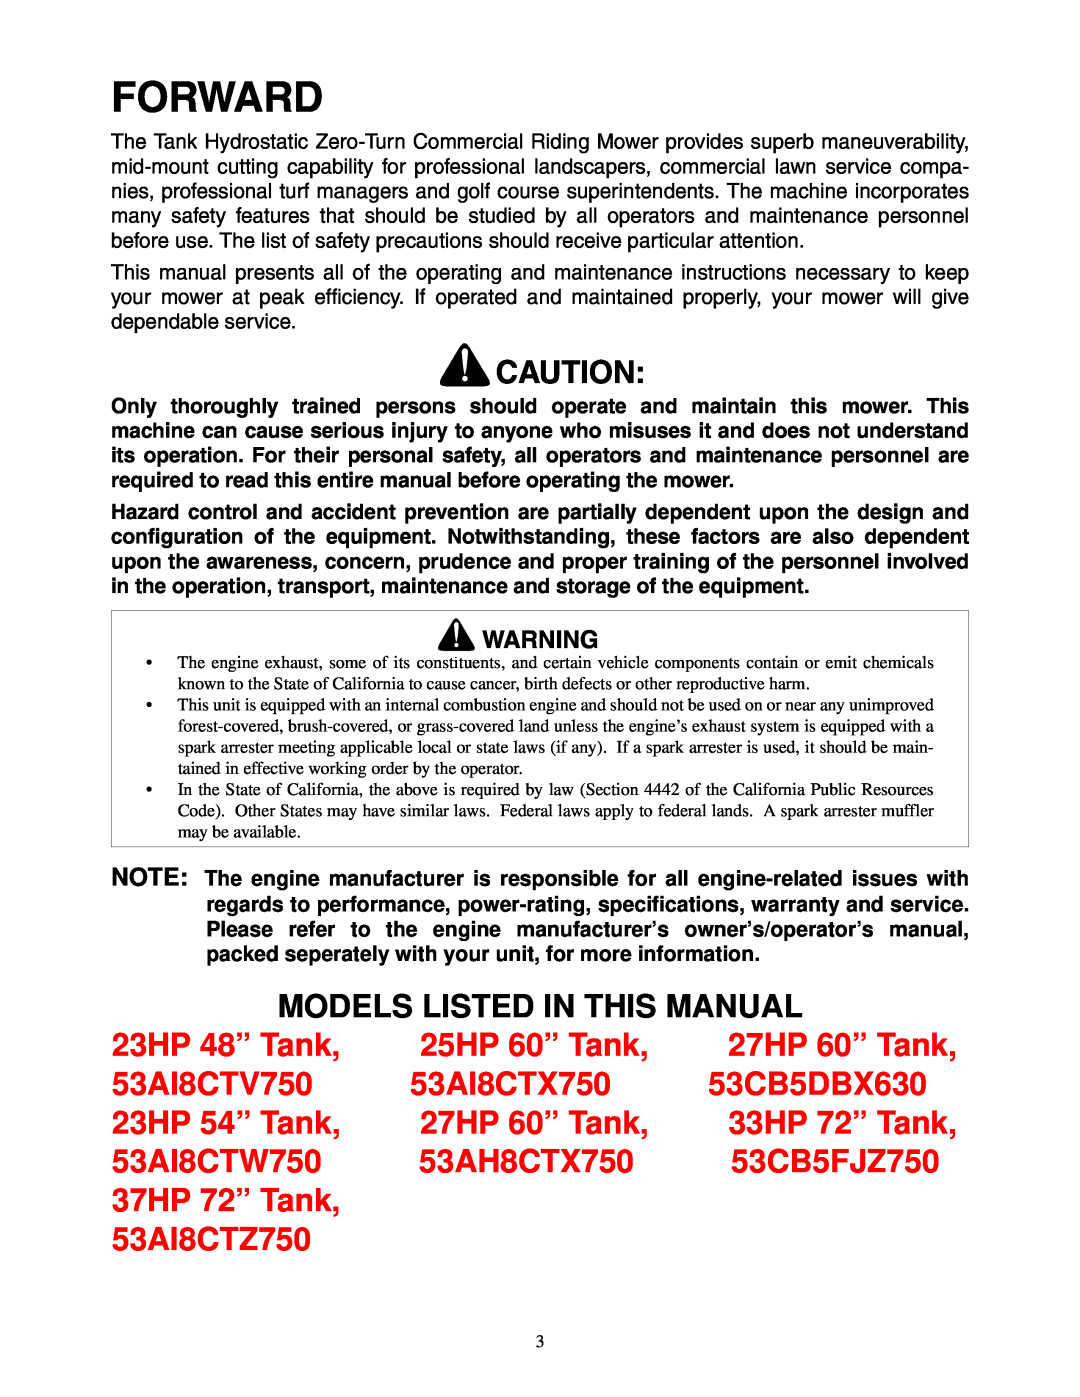 Cub Cadet 48-inch/54-inch/60-inch/72-inch service manual Models Listed In This Manual, Forward 